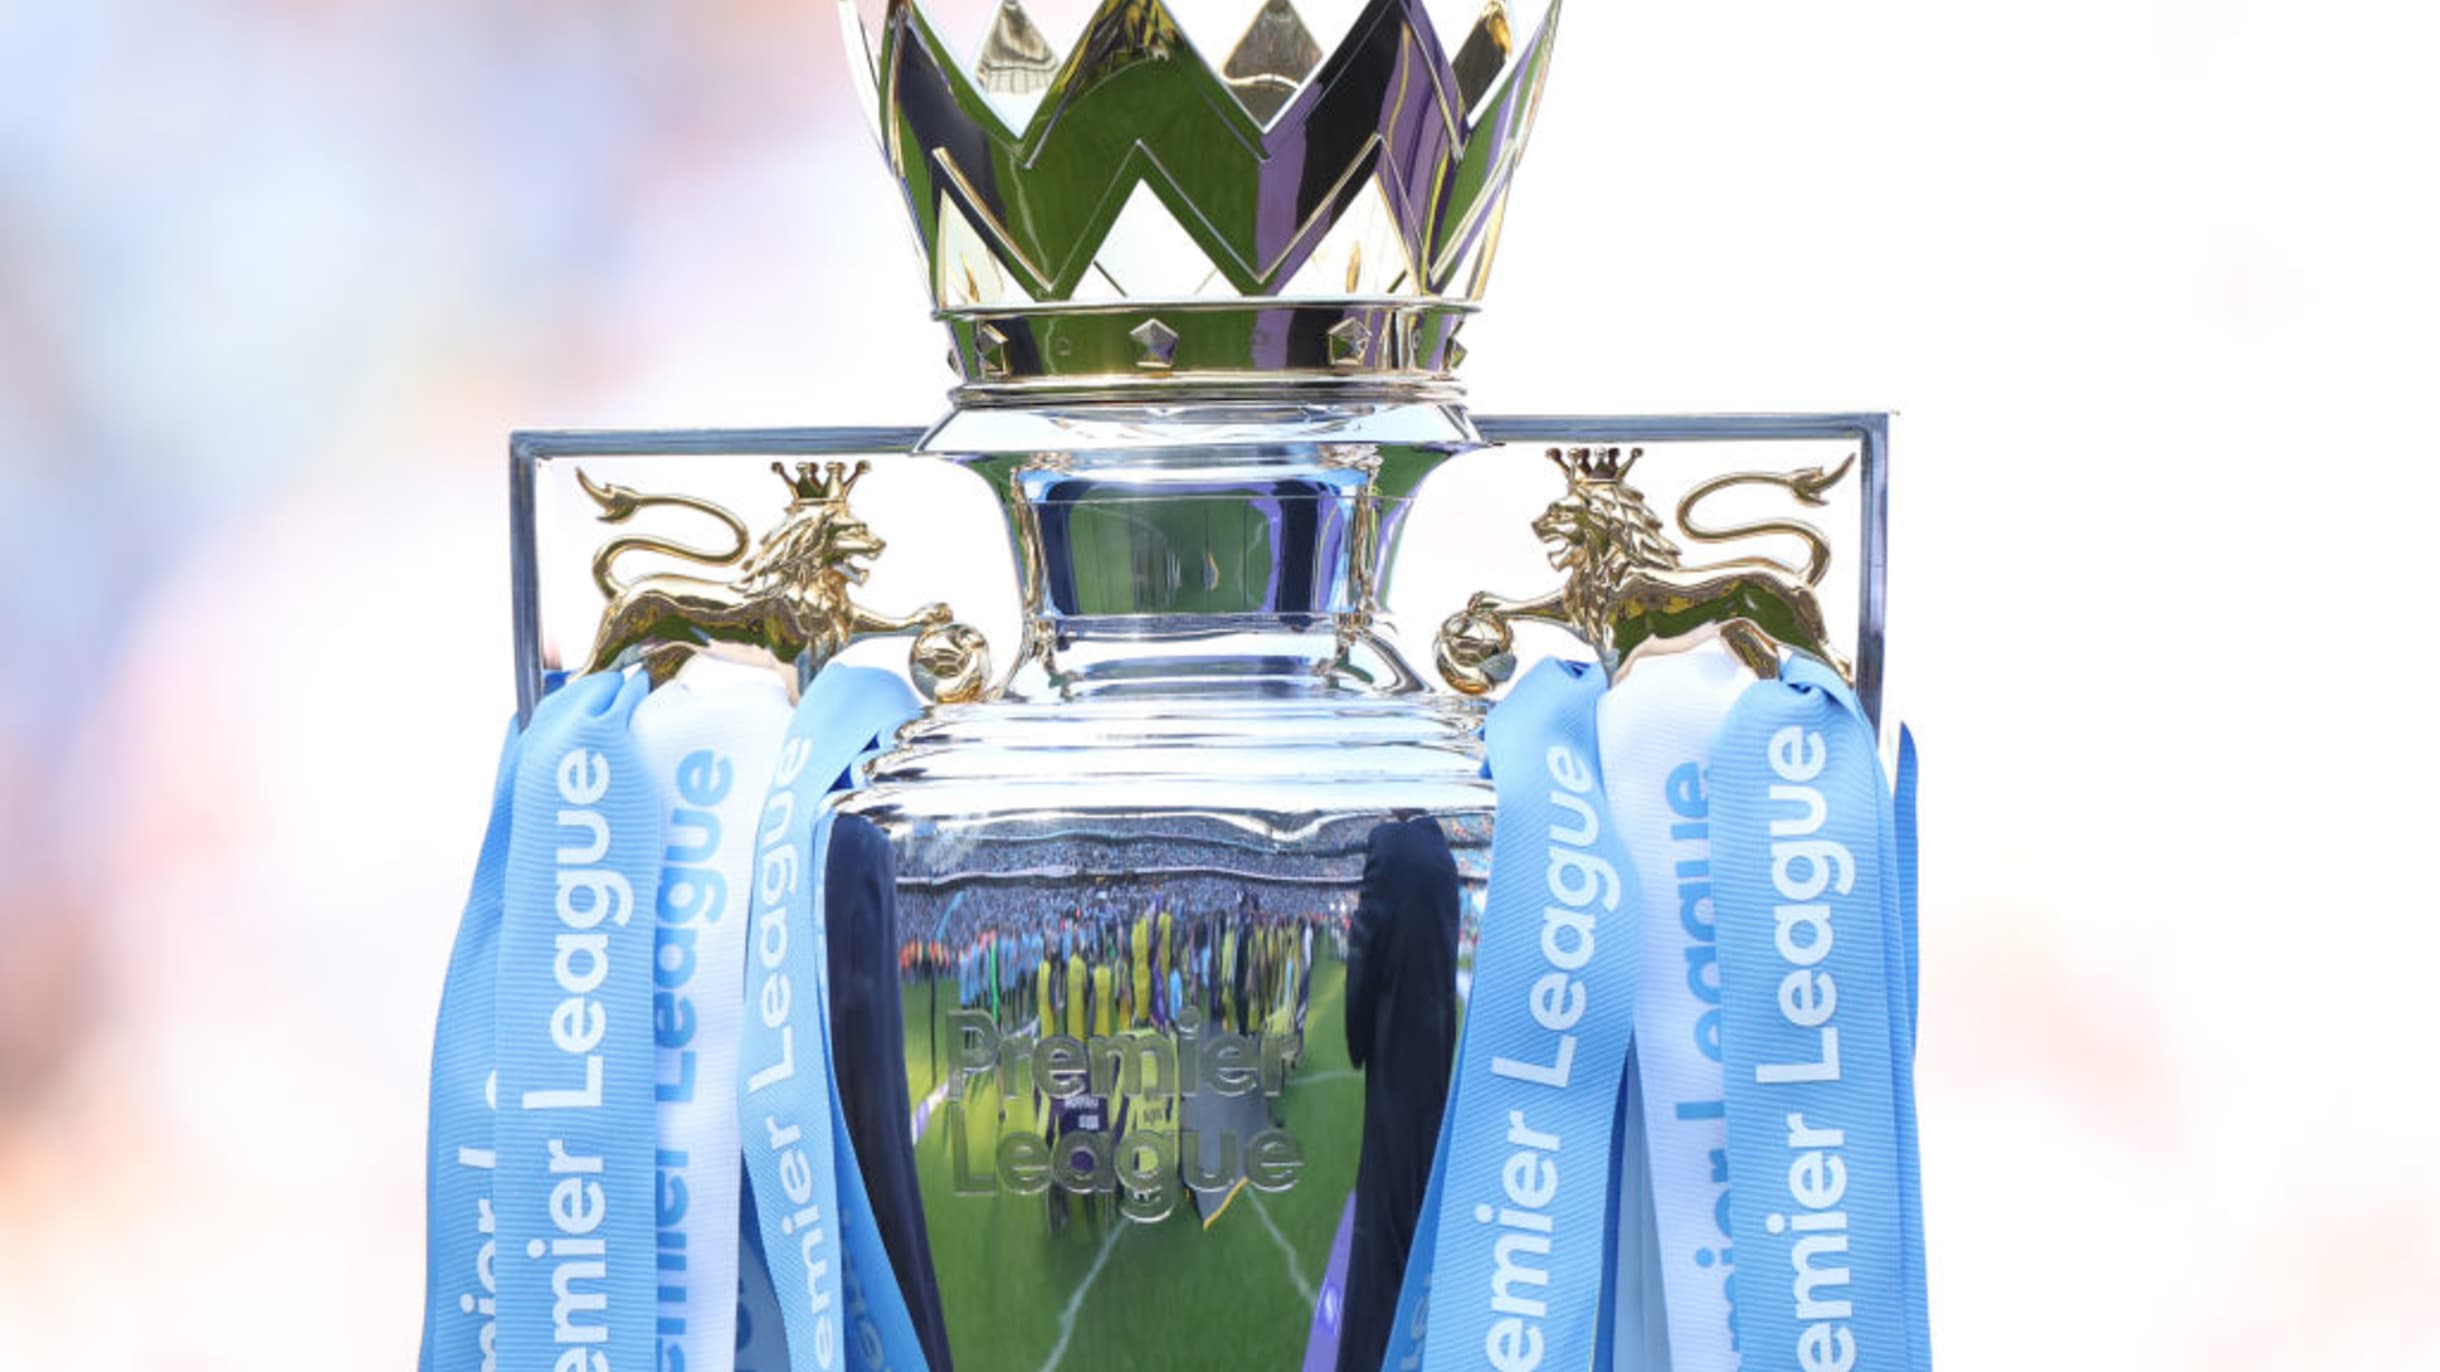 Premier League 2023-24 Get schedule and watch EPL live streaming and telecast in India